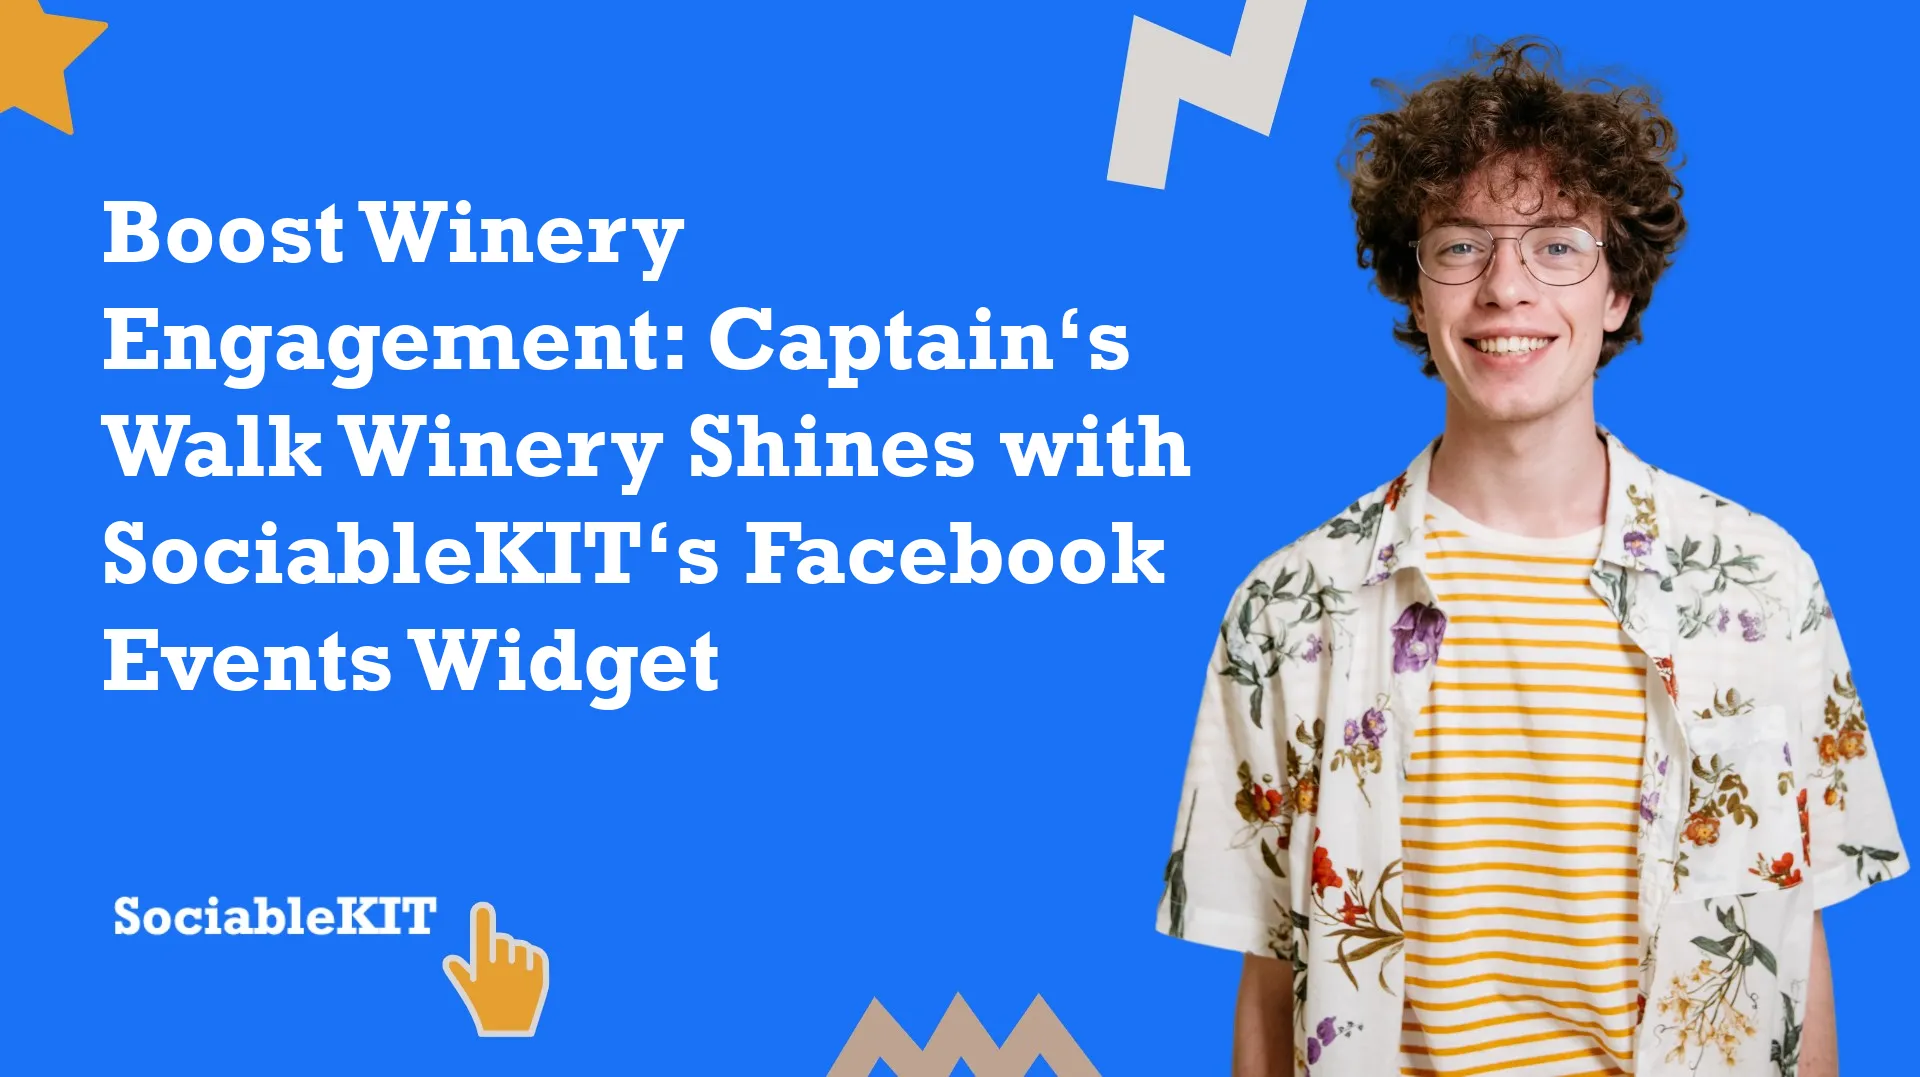 Boost Winery Engagement: Captain’s Walk Winery Shines with SociableKIT’s Facebook Events Widget